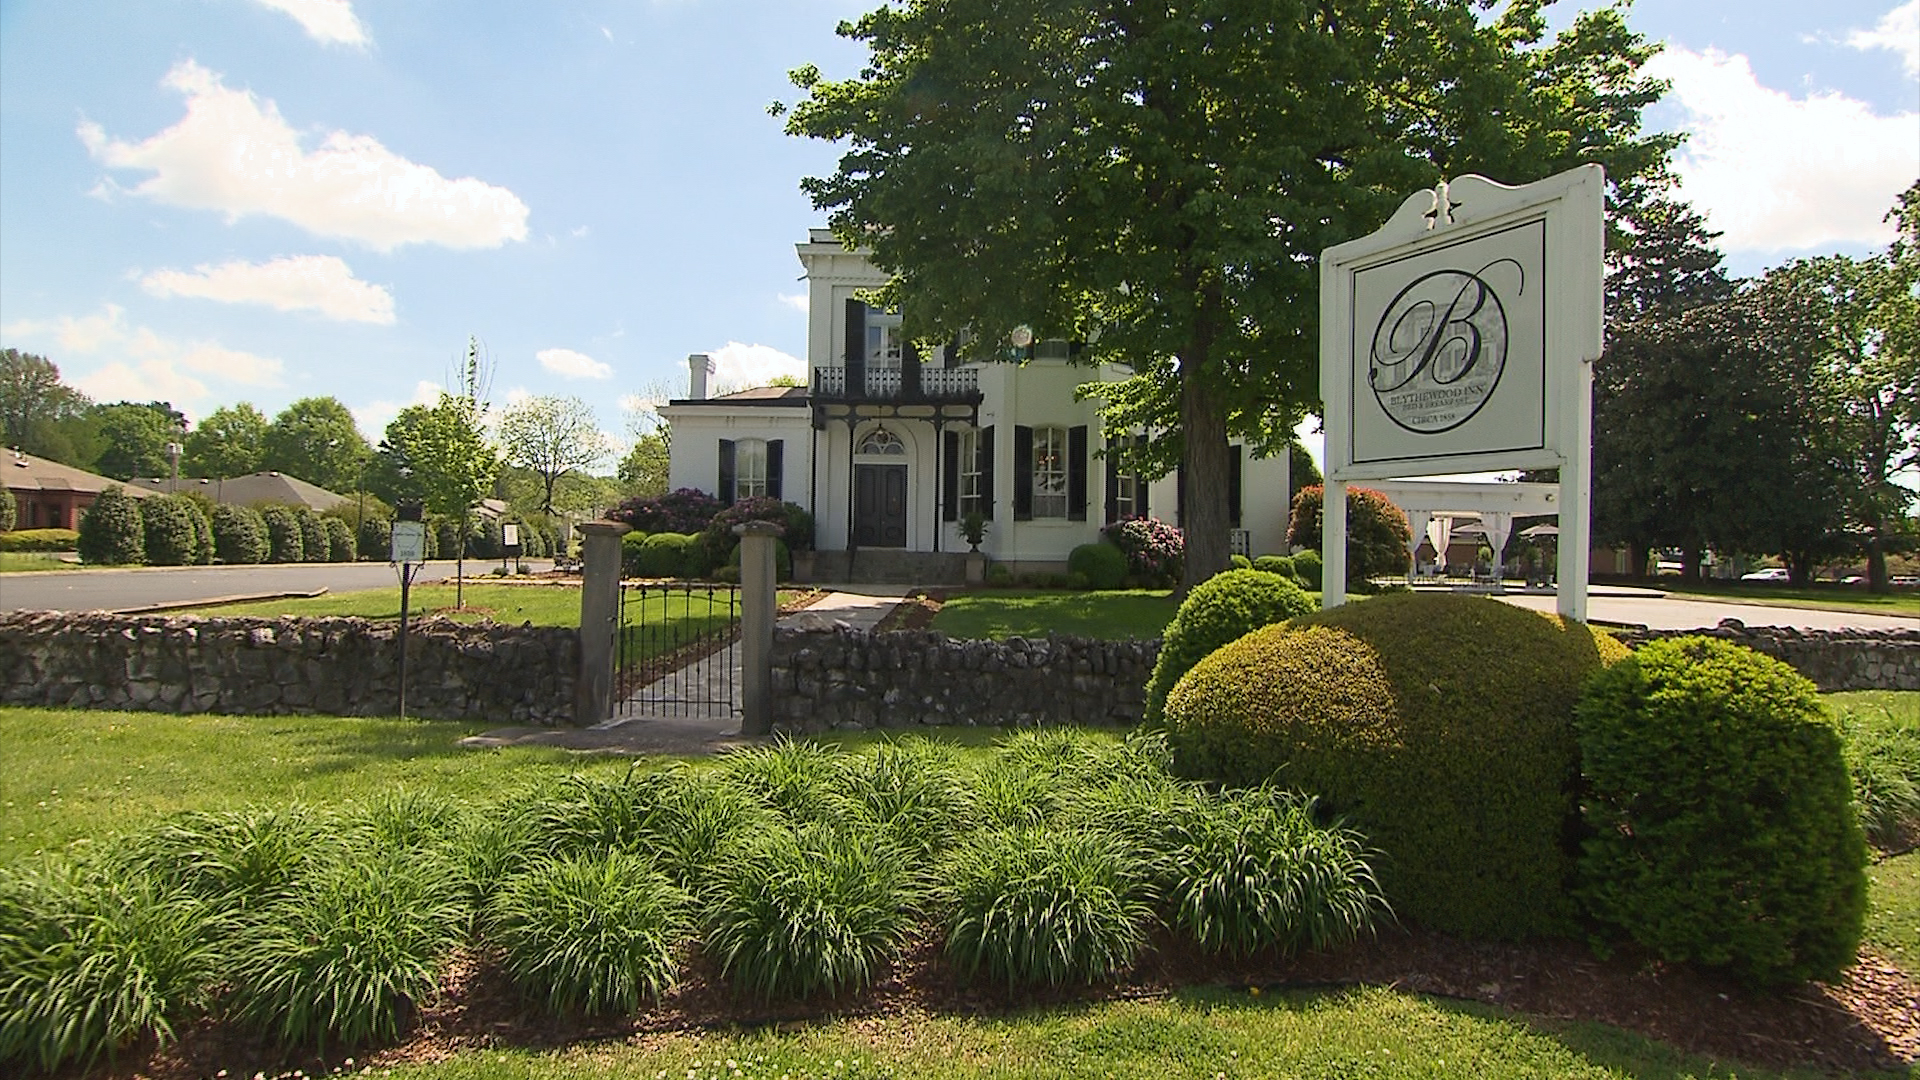 Blythewood Inn Bed and Breakfast - Tennessee Crossroads - Episode 3249.2